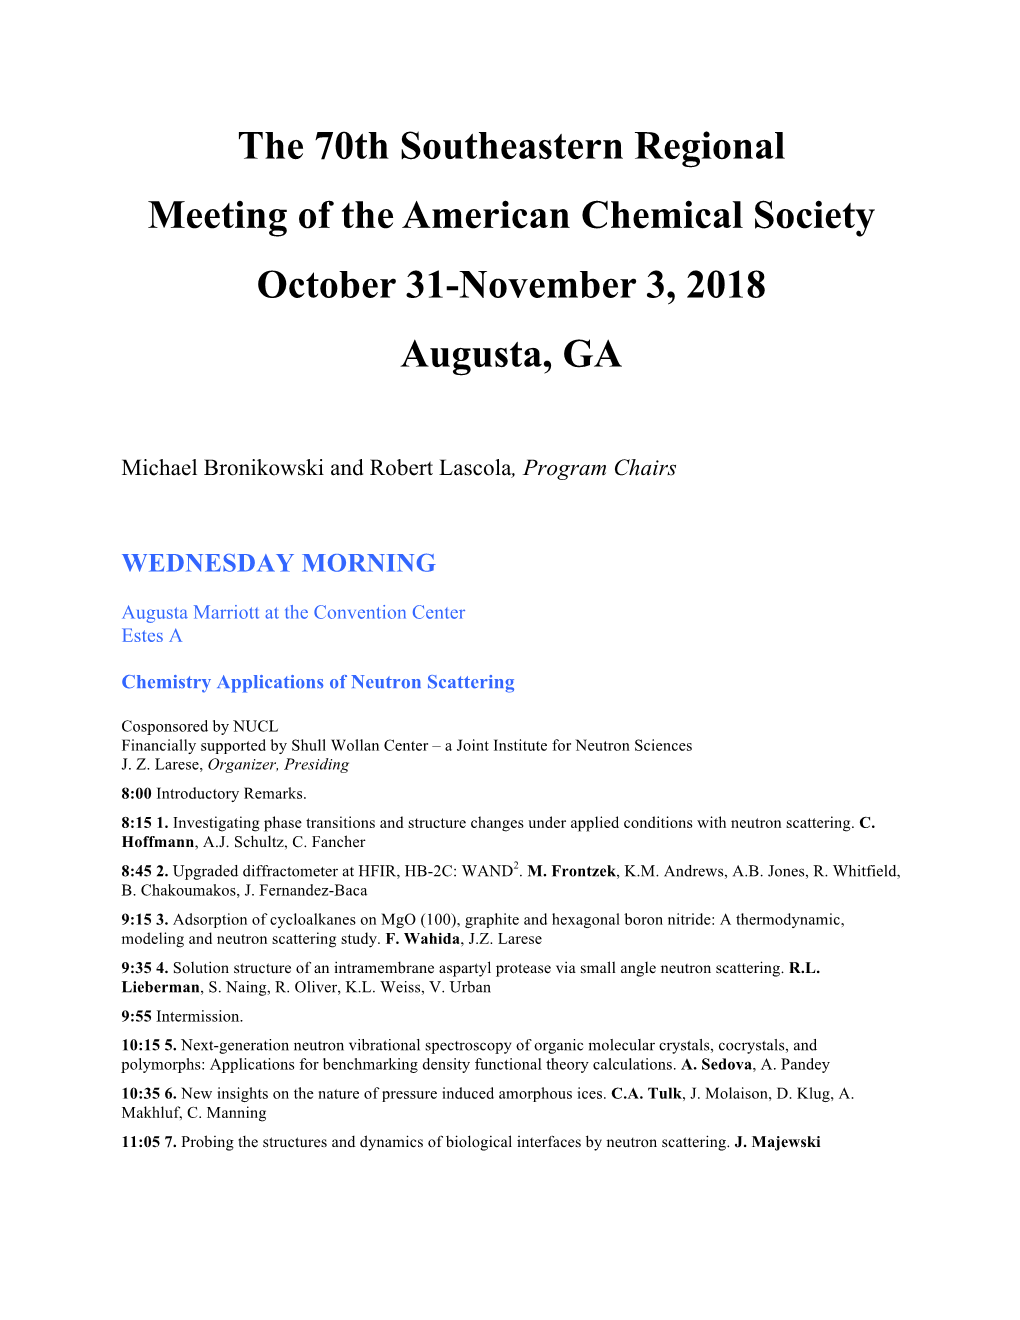 The 70Th Southeastern Regional Meeting of the American Chemical Society October 31-November 3, 2018 Augusta, GA